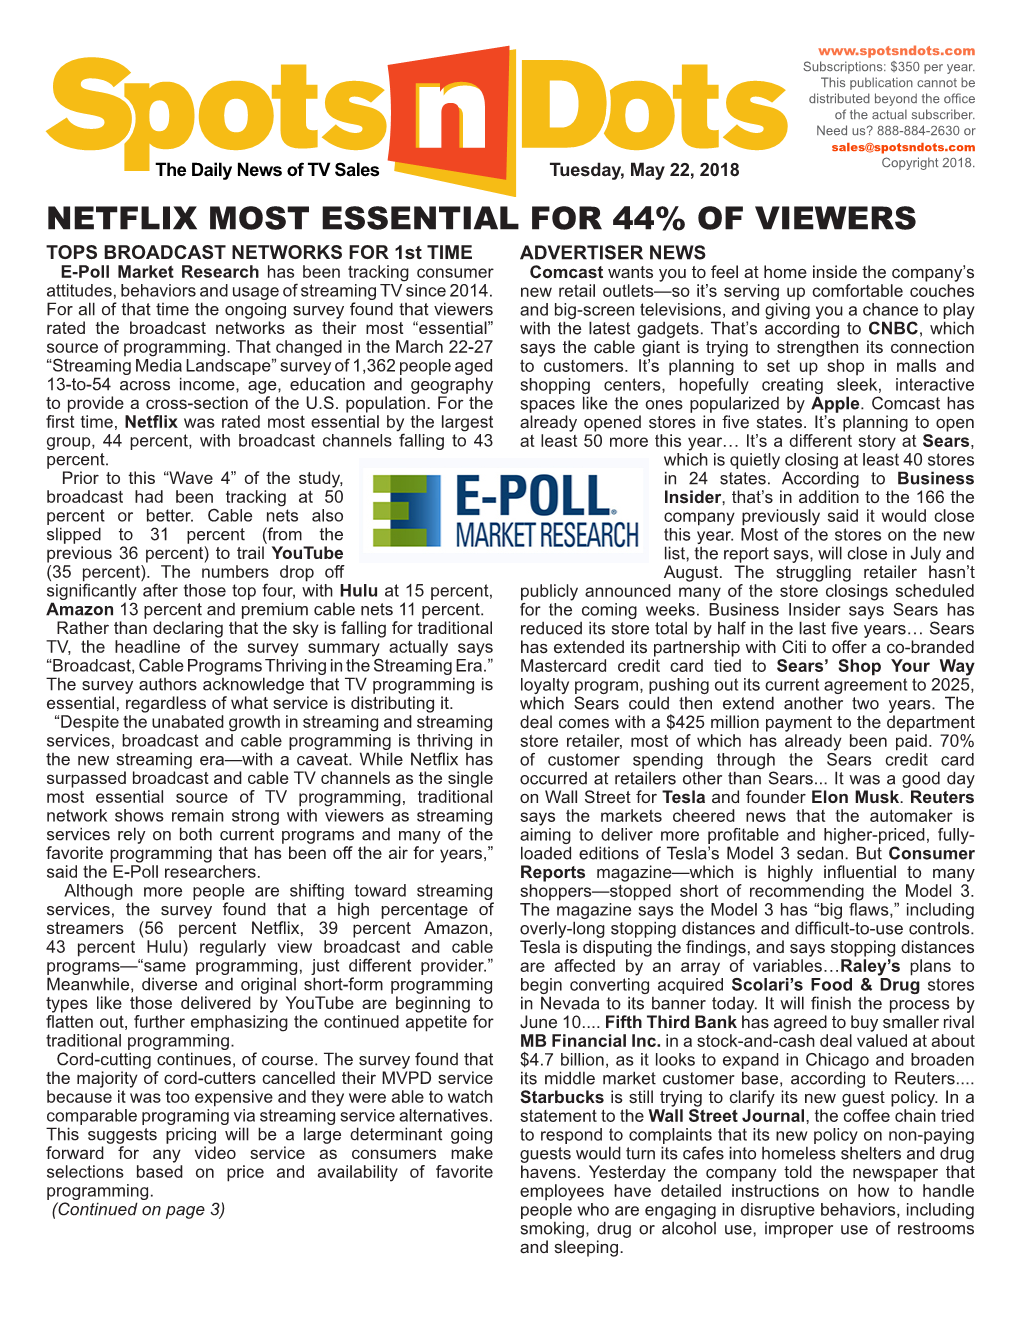 Netflix Most Essential for 44% of Viewers